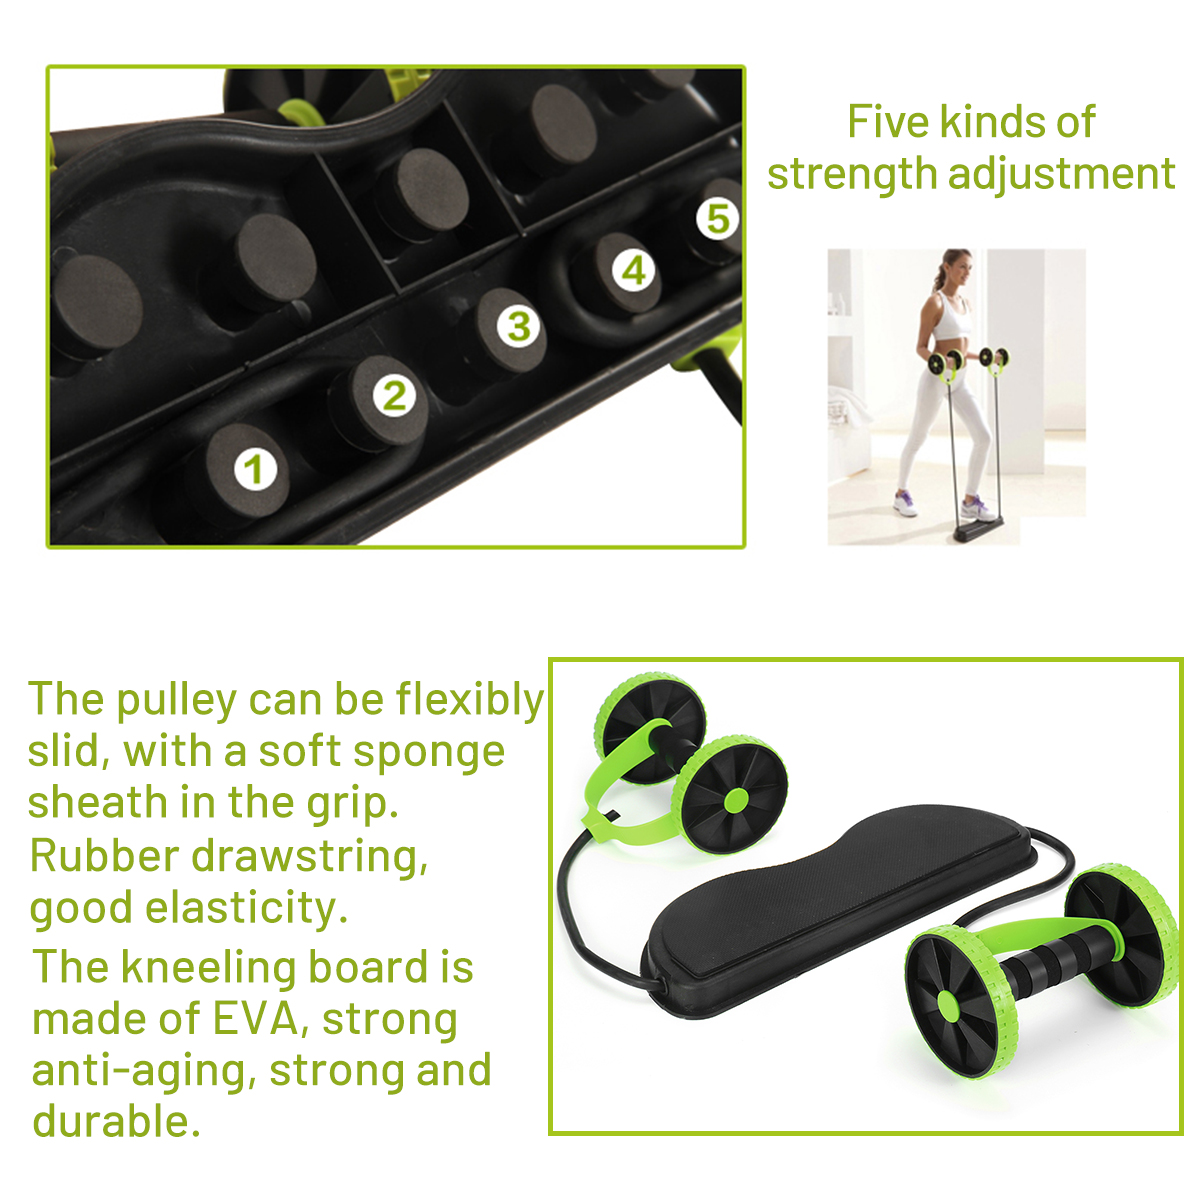 Double Ab Roller Wheels Exercise and Fitness Wheel for Home Gym Waist Slimming Trainer - image 3 of 5